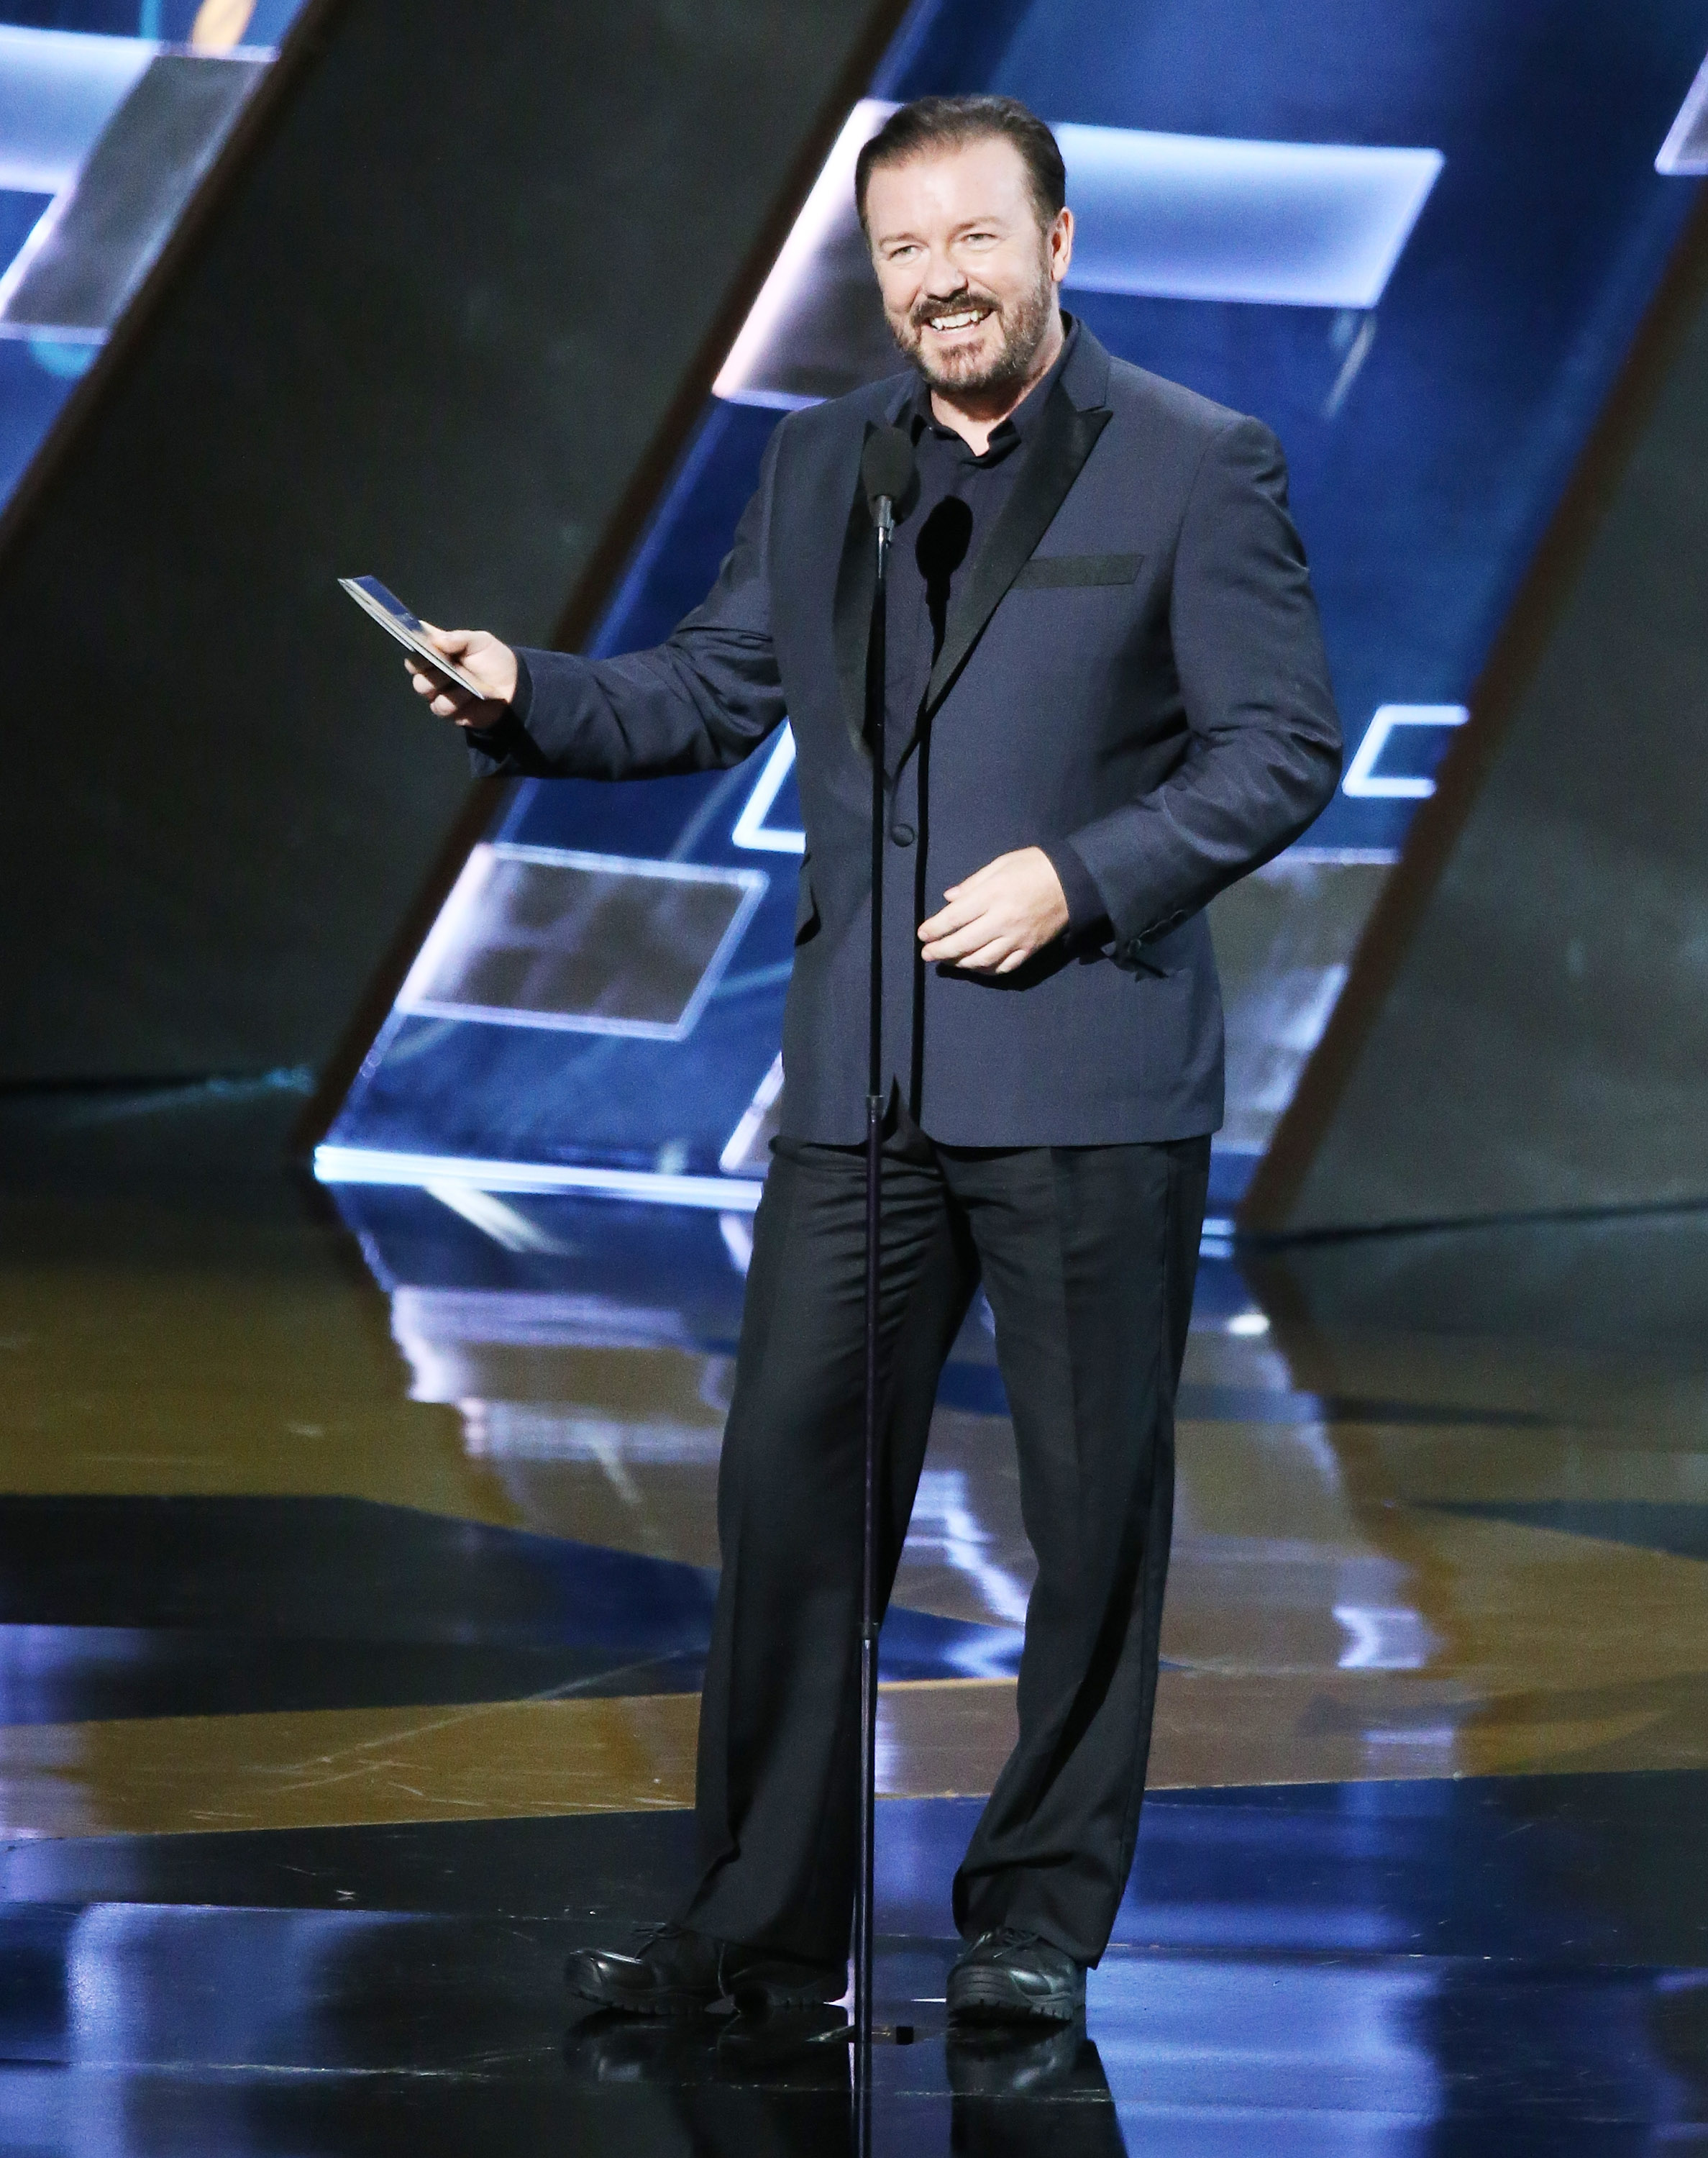 Ricky Gervais onstage during the 67th Annual Primetime Emmy Awards held at Microsoft Theater in Los Angeles, on on Sept. 20, 2015. (Michael Tran—FilmMagic/Getty Images)